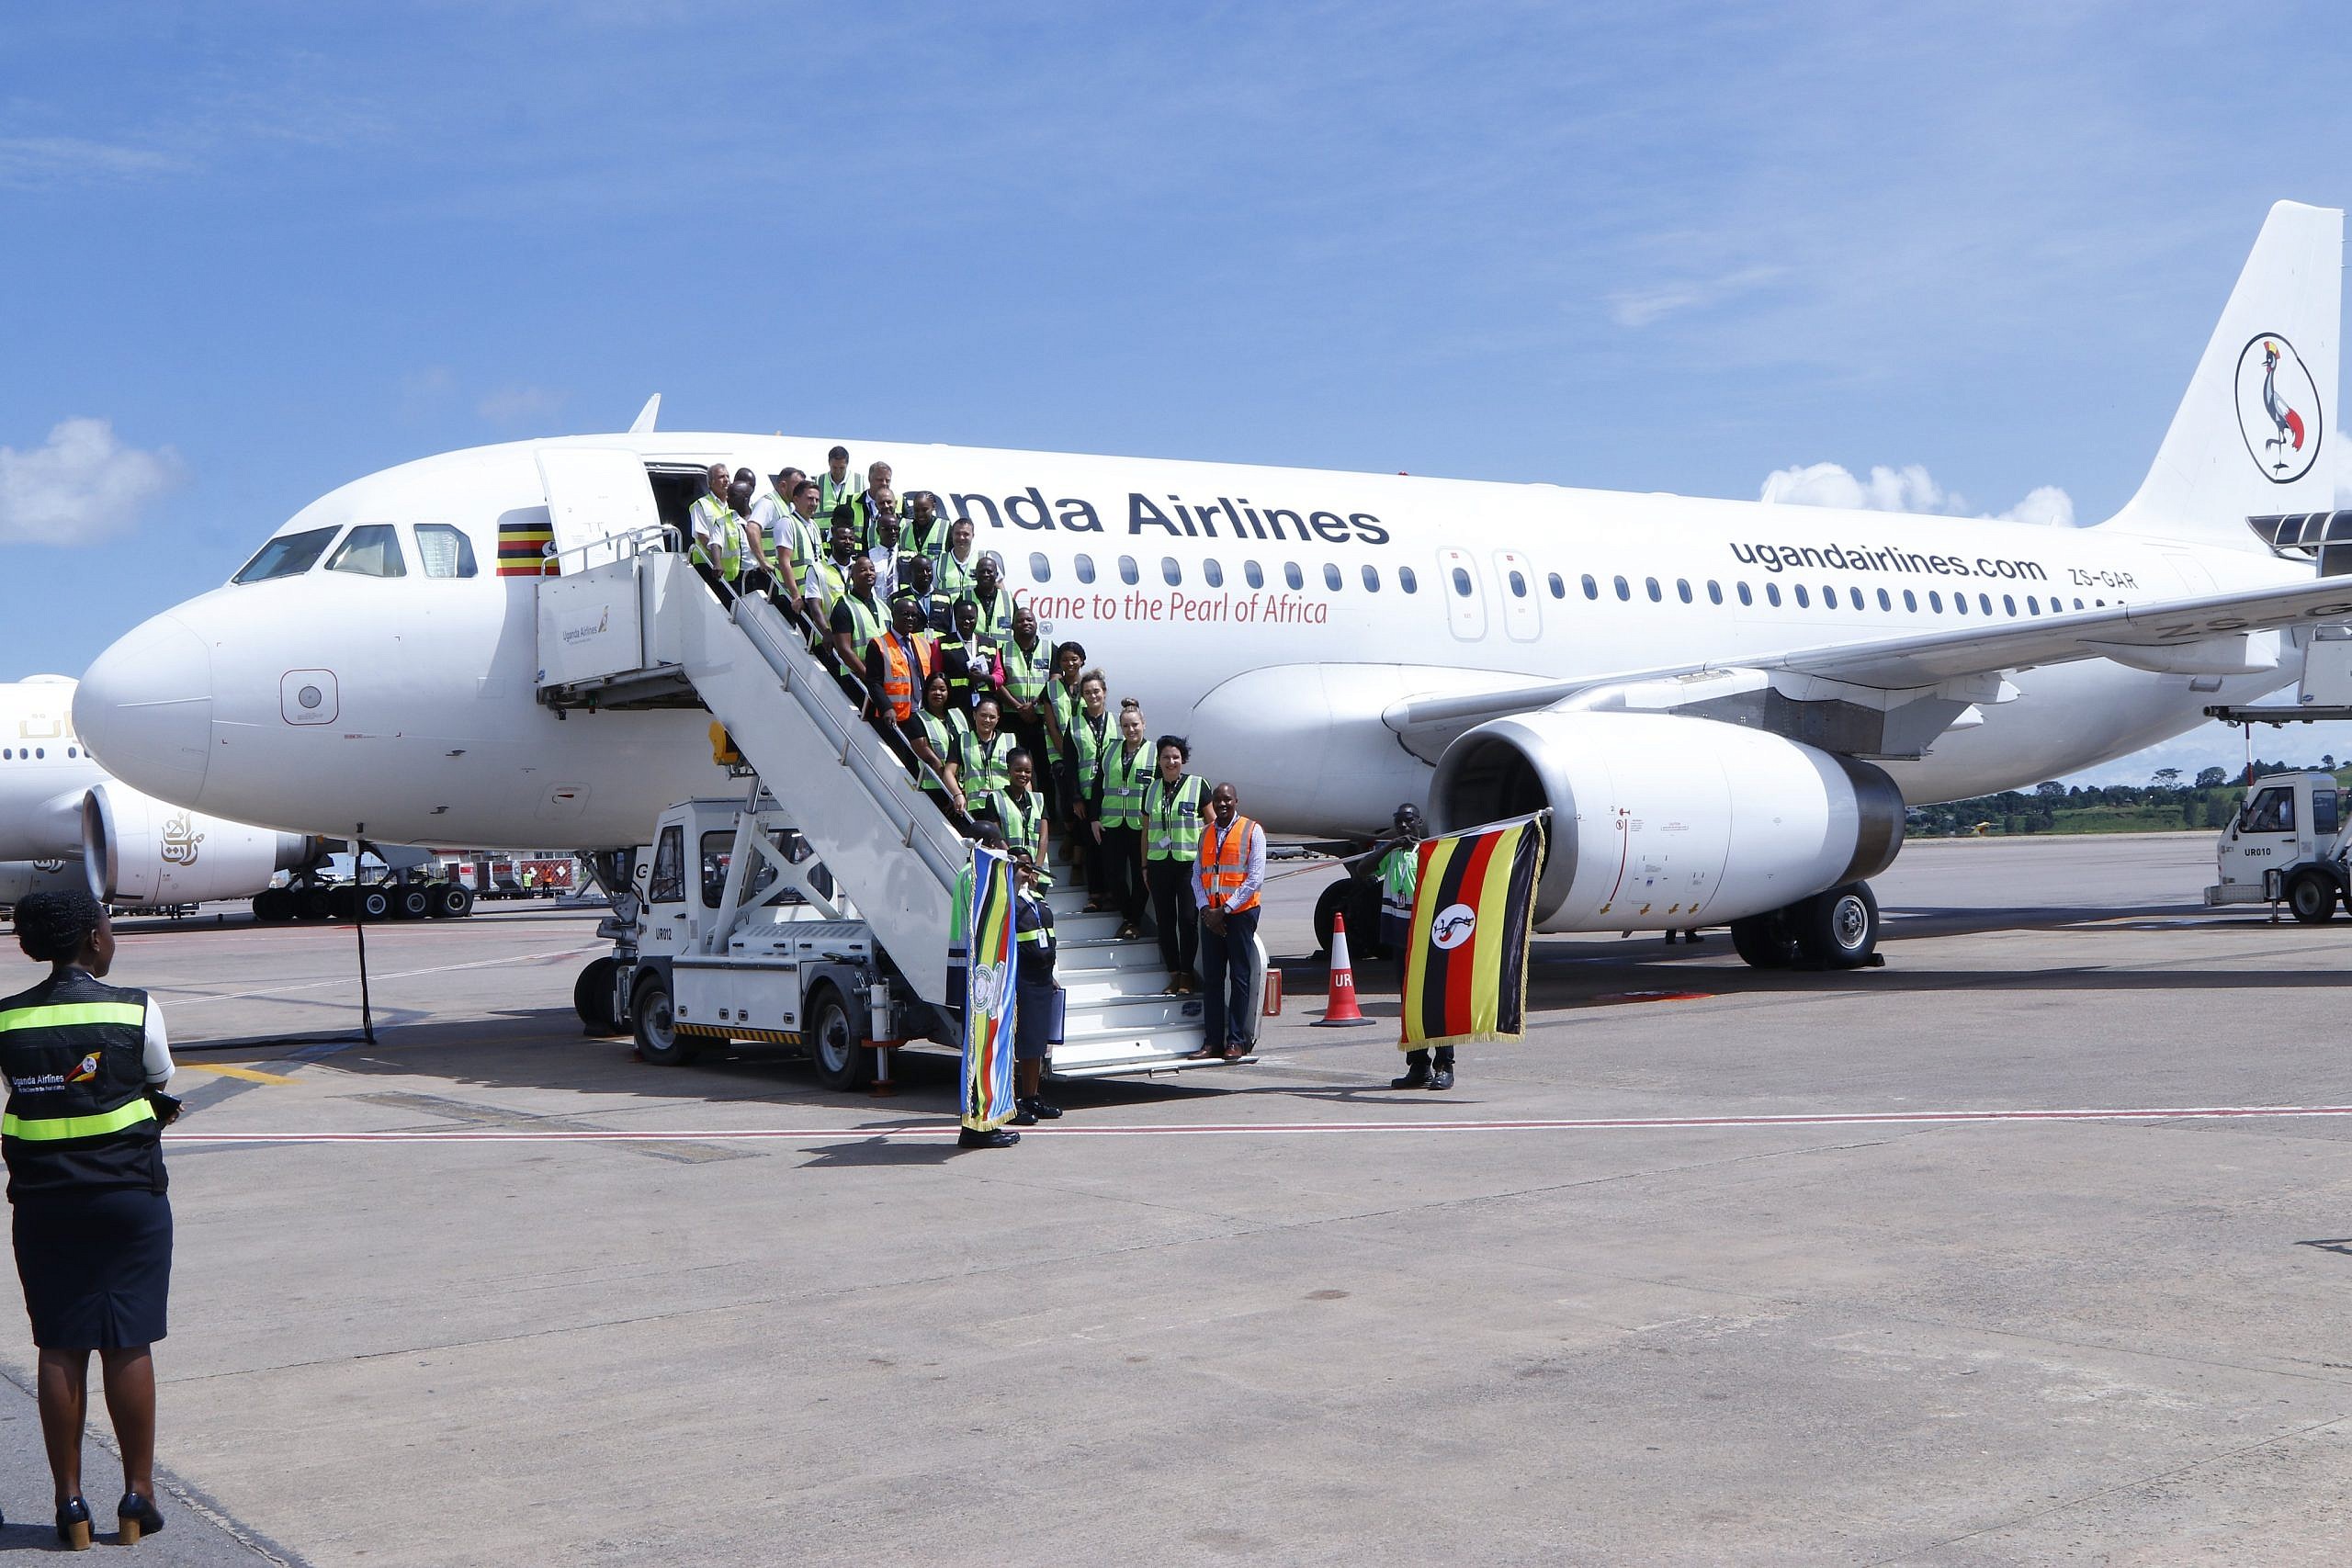 Uganda Airlines adds new Airbus A320 aircraft to its fleet